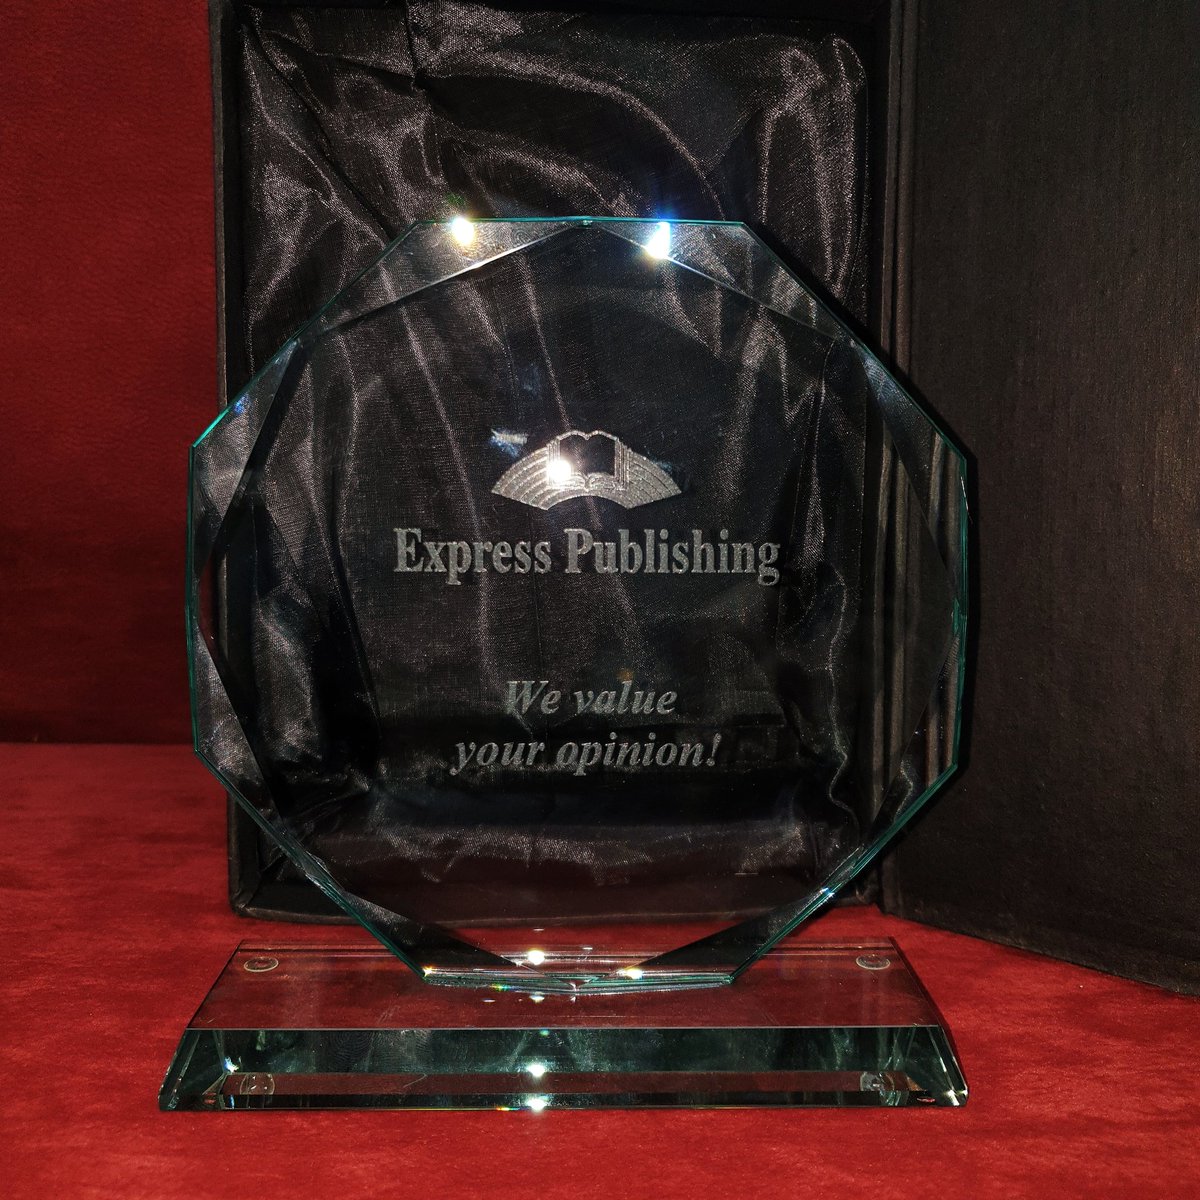 Special thanks to Express Publishing 
for awarding this commemorative plaque to Mrs Asimenia Featham for her contributions to their Expert Focus Group as part of their 2020 Market Research Project. 
#Featham #MakeADifference #EnglishOurWay #MakingHistoryInELT #ExpressPublishing